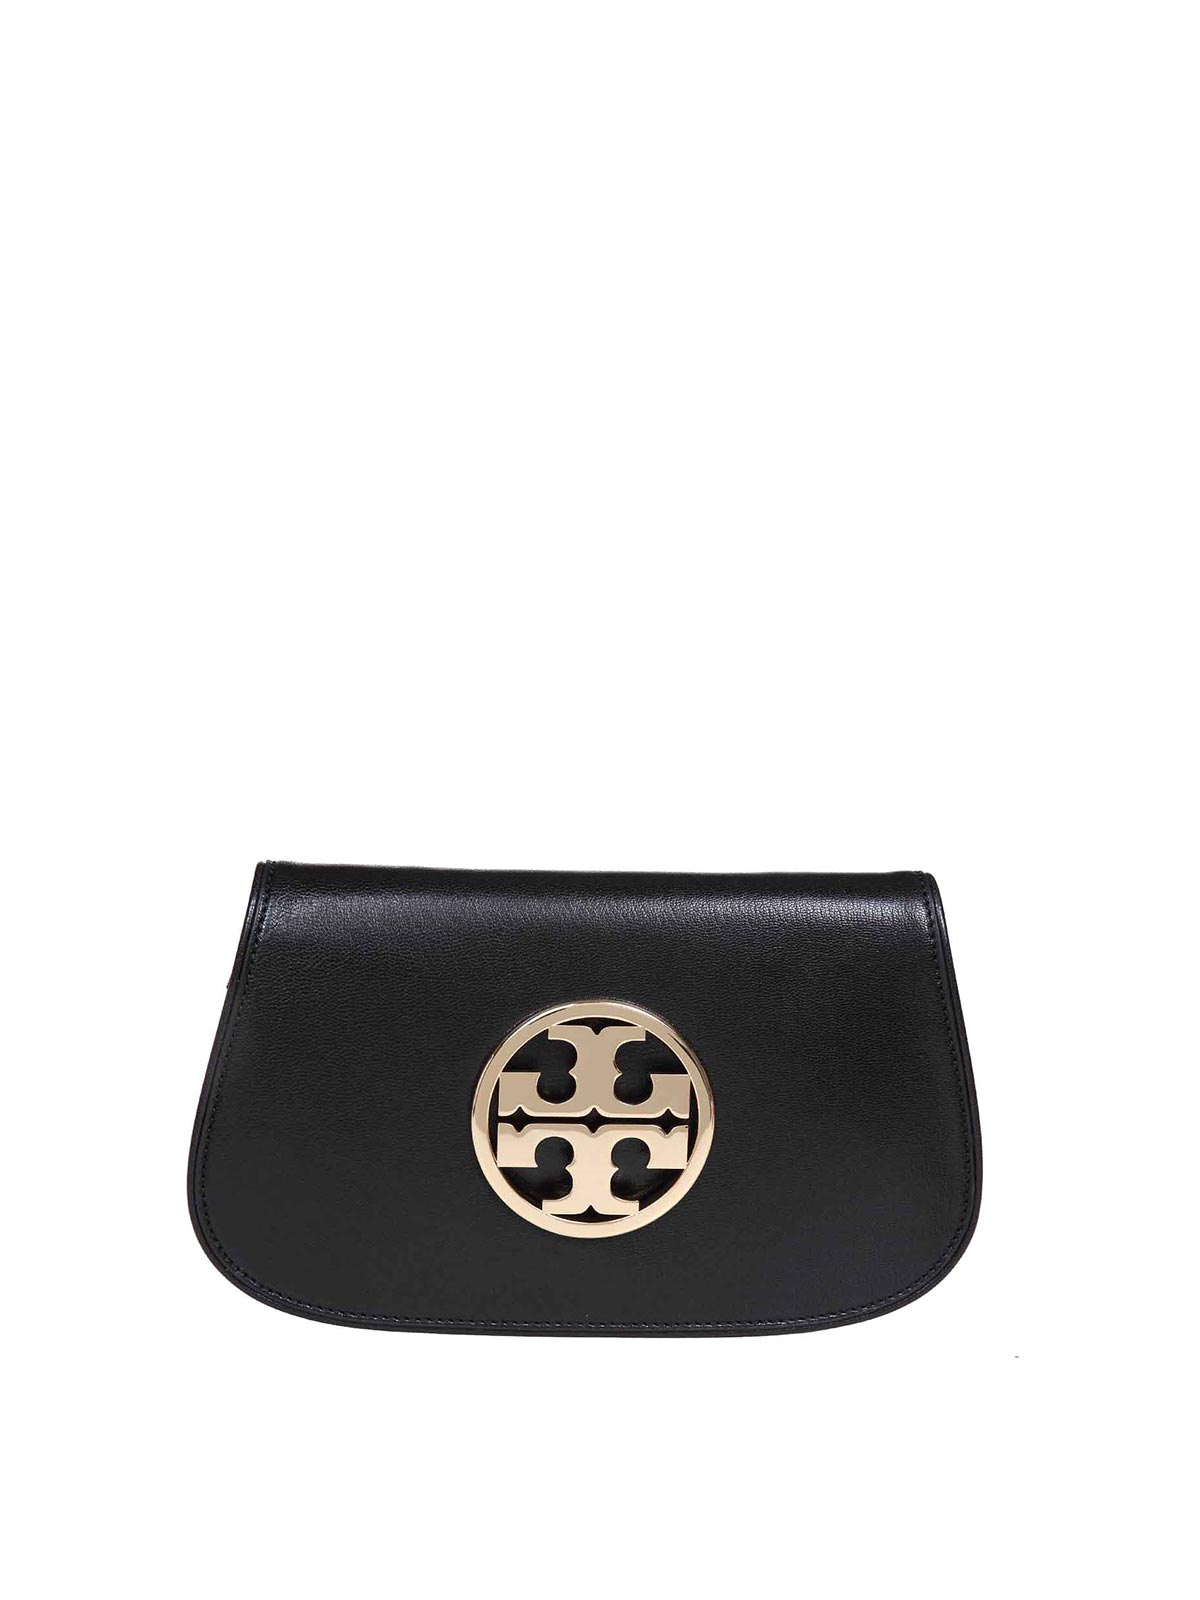 Sand Kira Envelope Clutch by Tory Burch Accessories for $20 | Rent the  Runway